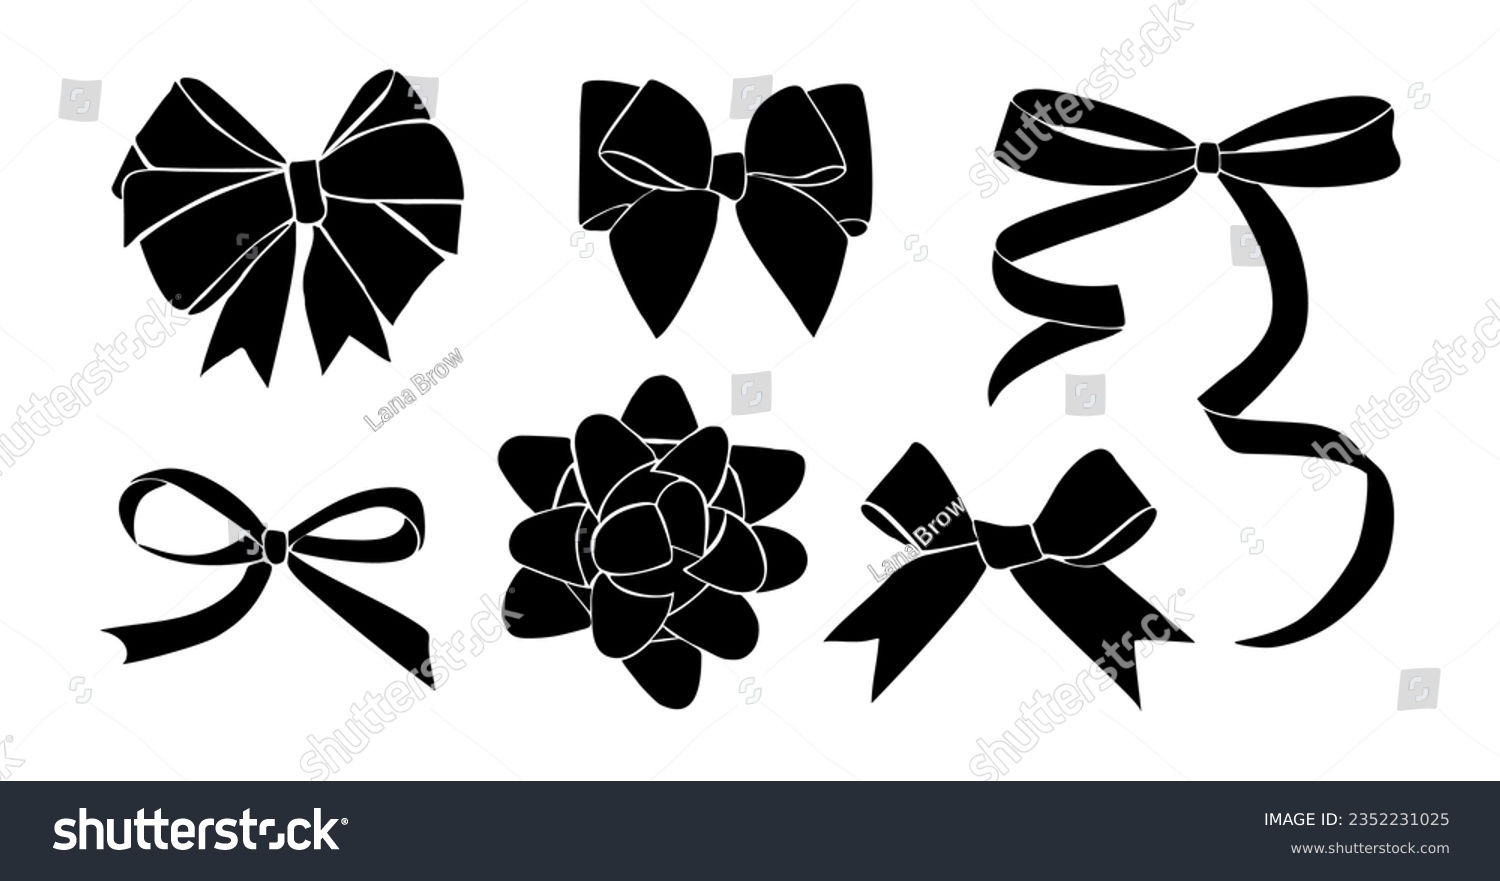 SVG of Black Monochrome decorative ribbon bows set. Holiday sign collection. Ribbon symbol, accessory logo, svg, cut files. Vector outline illustrations isolated on white background svg